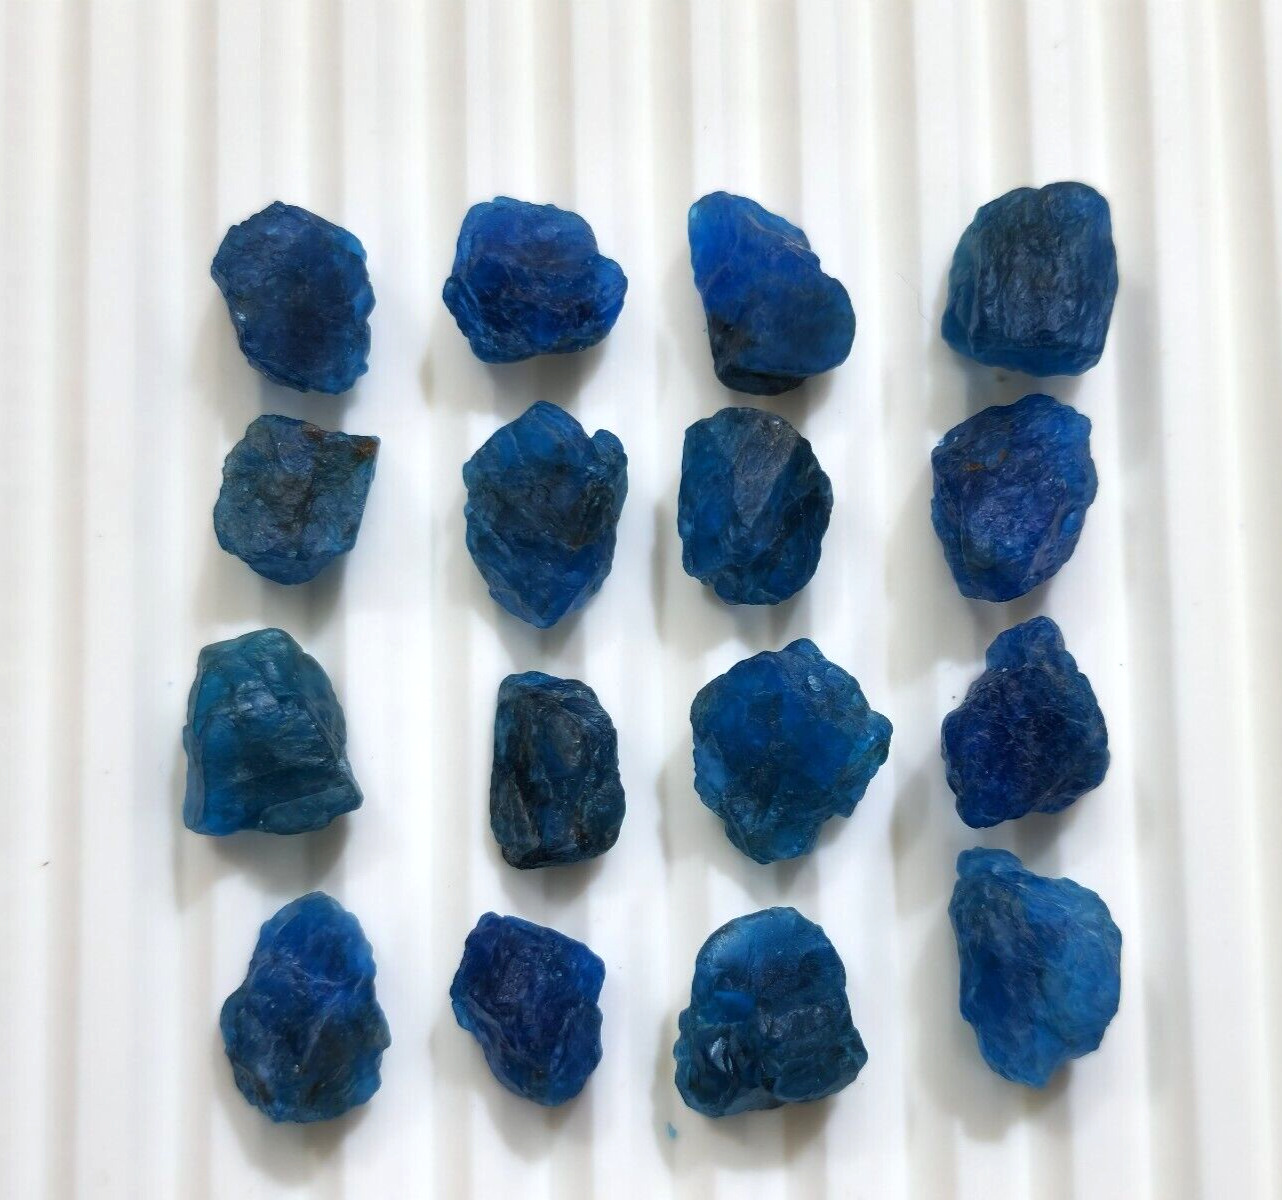 112 Crt Natural Raw Blue Color Neon Apatite Rough Loose Gemstone For Jewelry